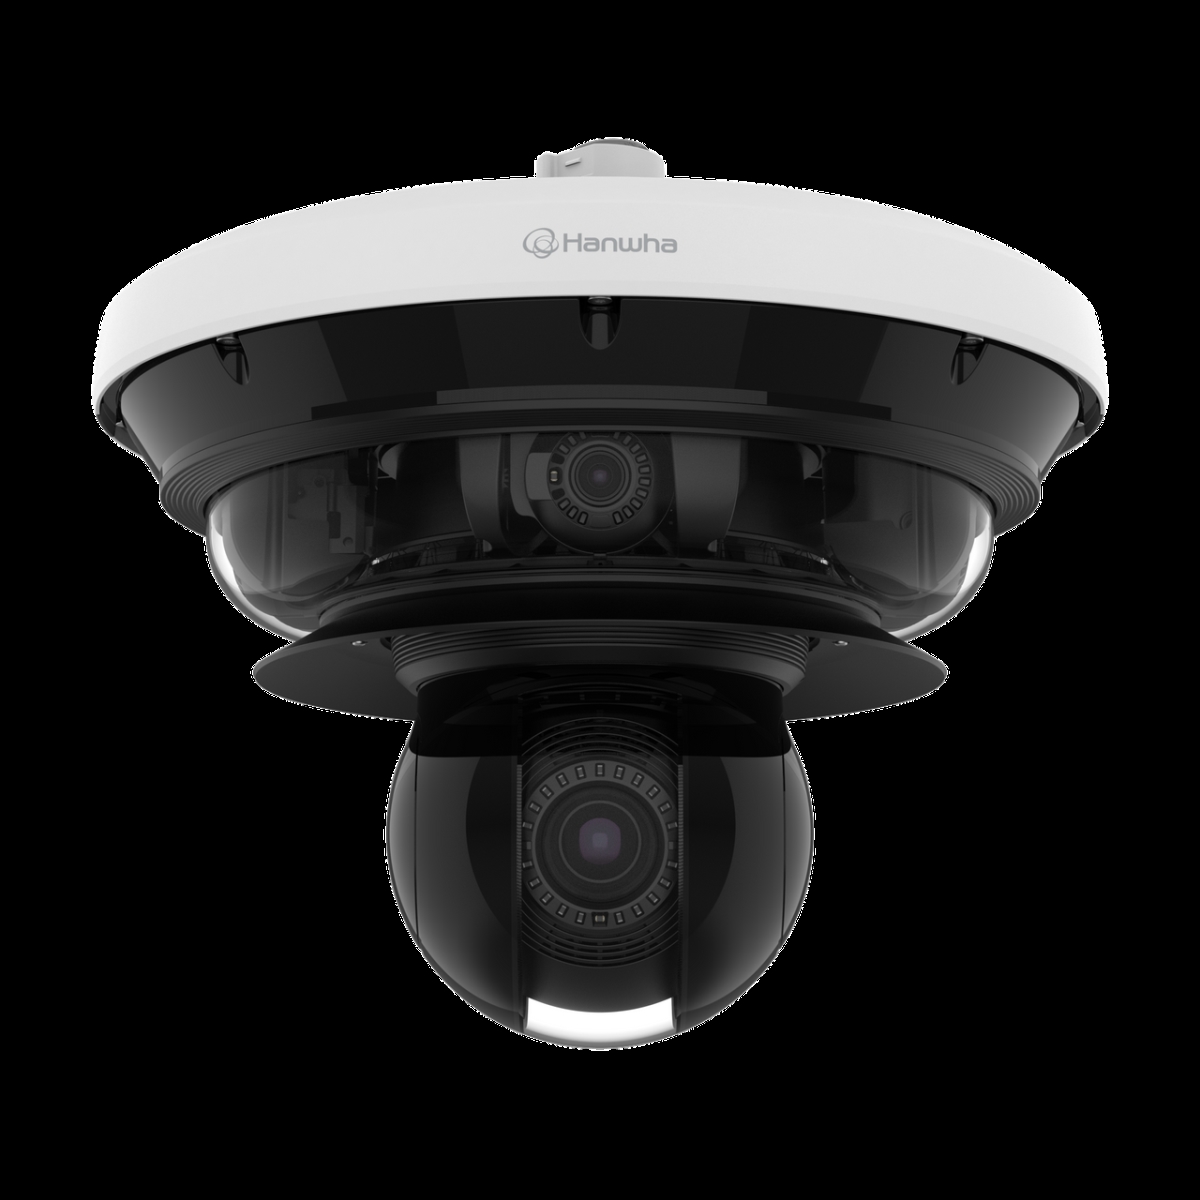 Picture of Hanwha PNM-C34404RQPZ Wisenet P Series Network Vandal Outdoor Multi-Directional Camera